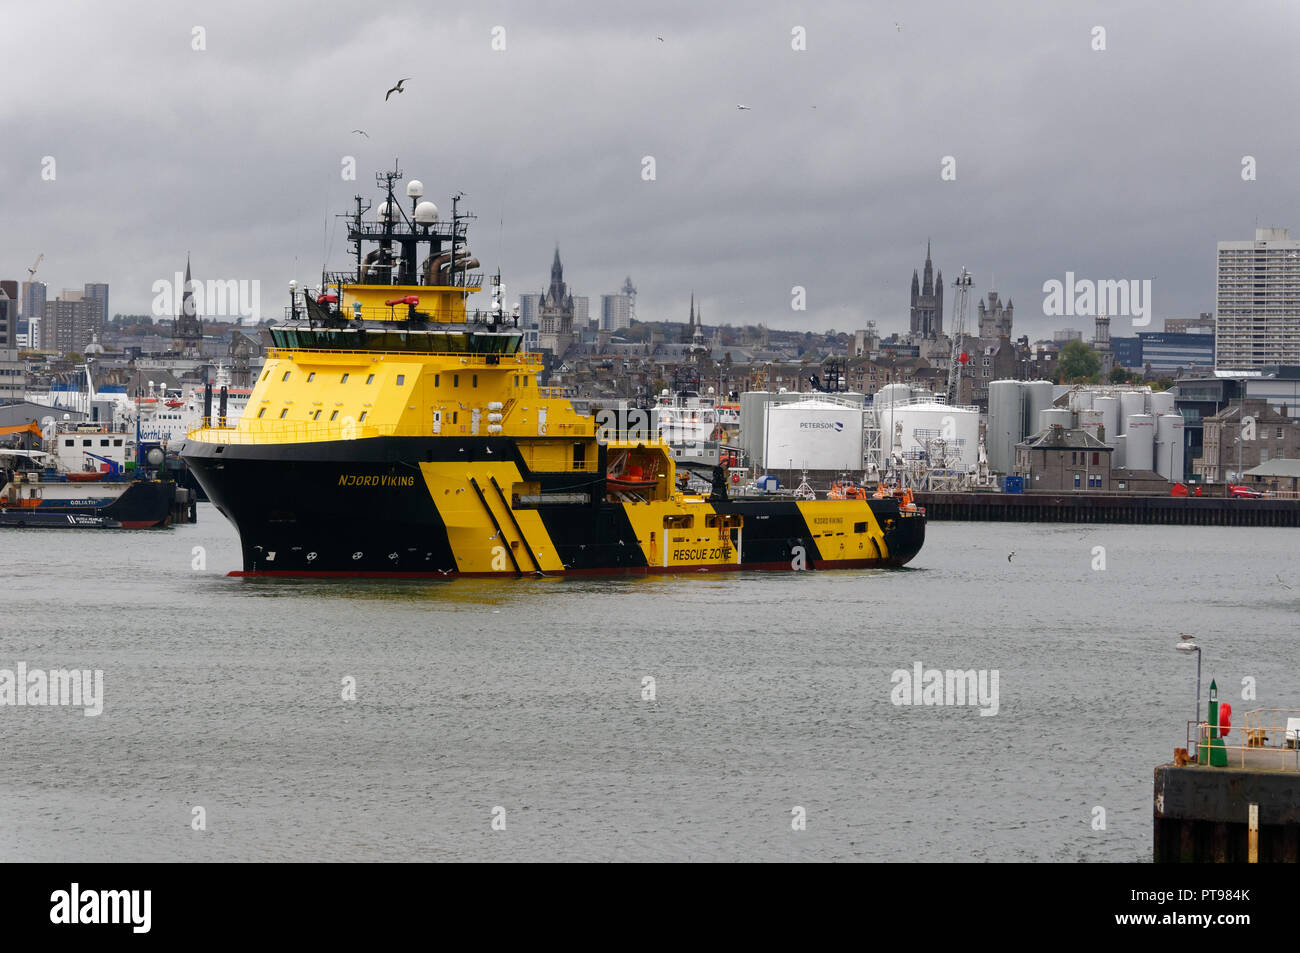 The Njord Viking High Ice-classed AHTS vessel capable of operations in harsh environment offshore seen in Aberdeen Harbour Stock Photo